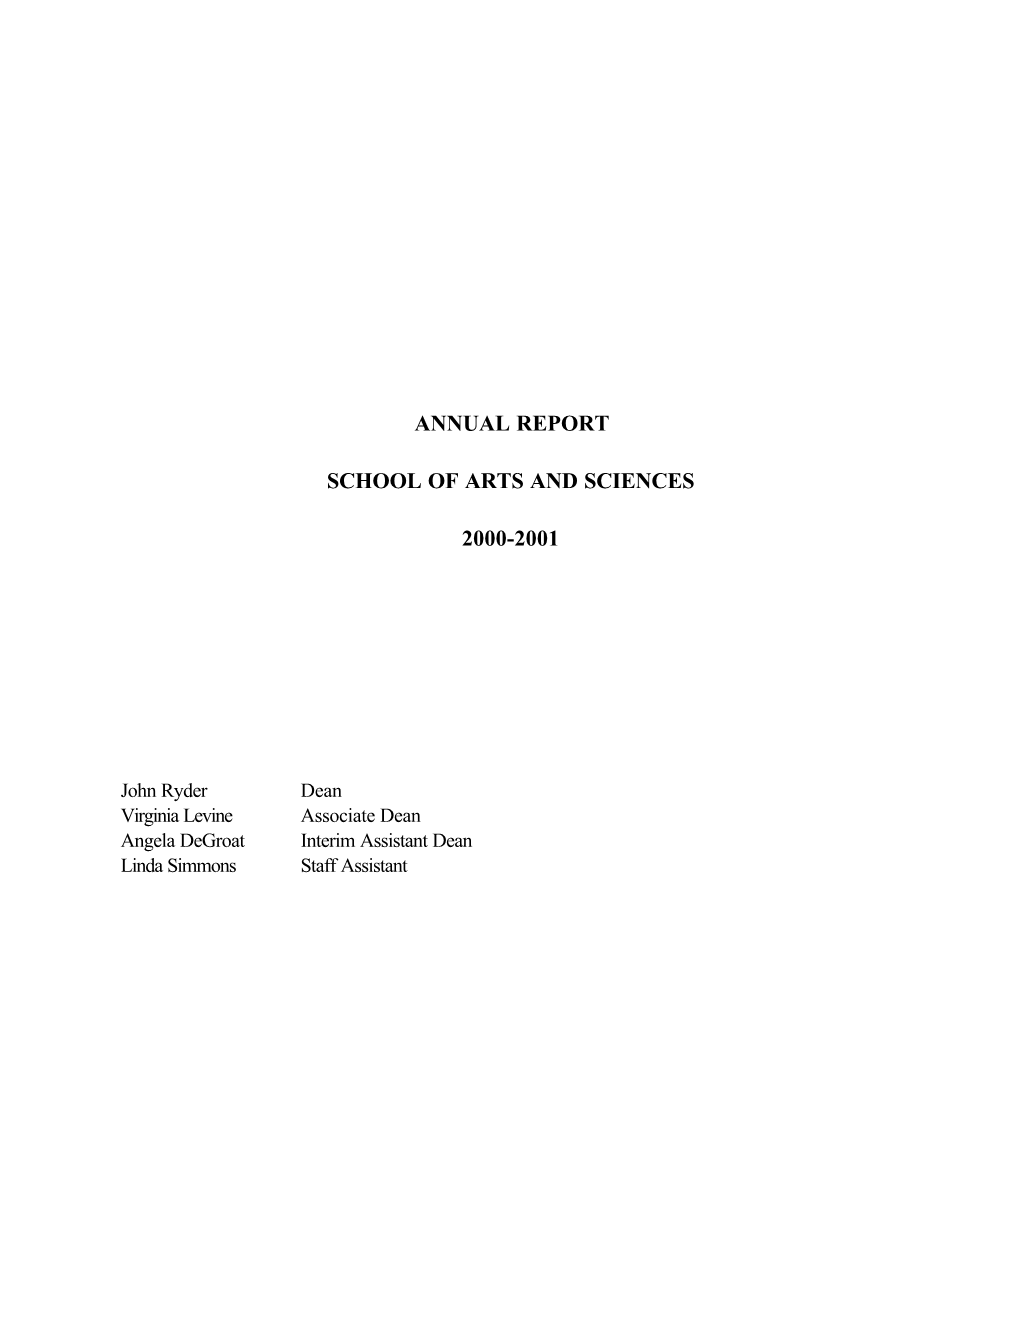 Annual Report School of Arts and Sciences 2000-2001